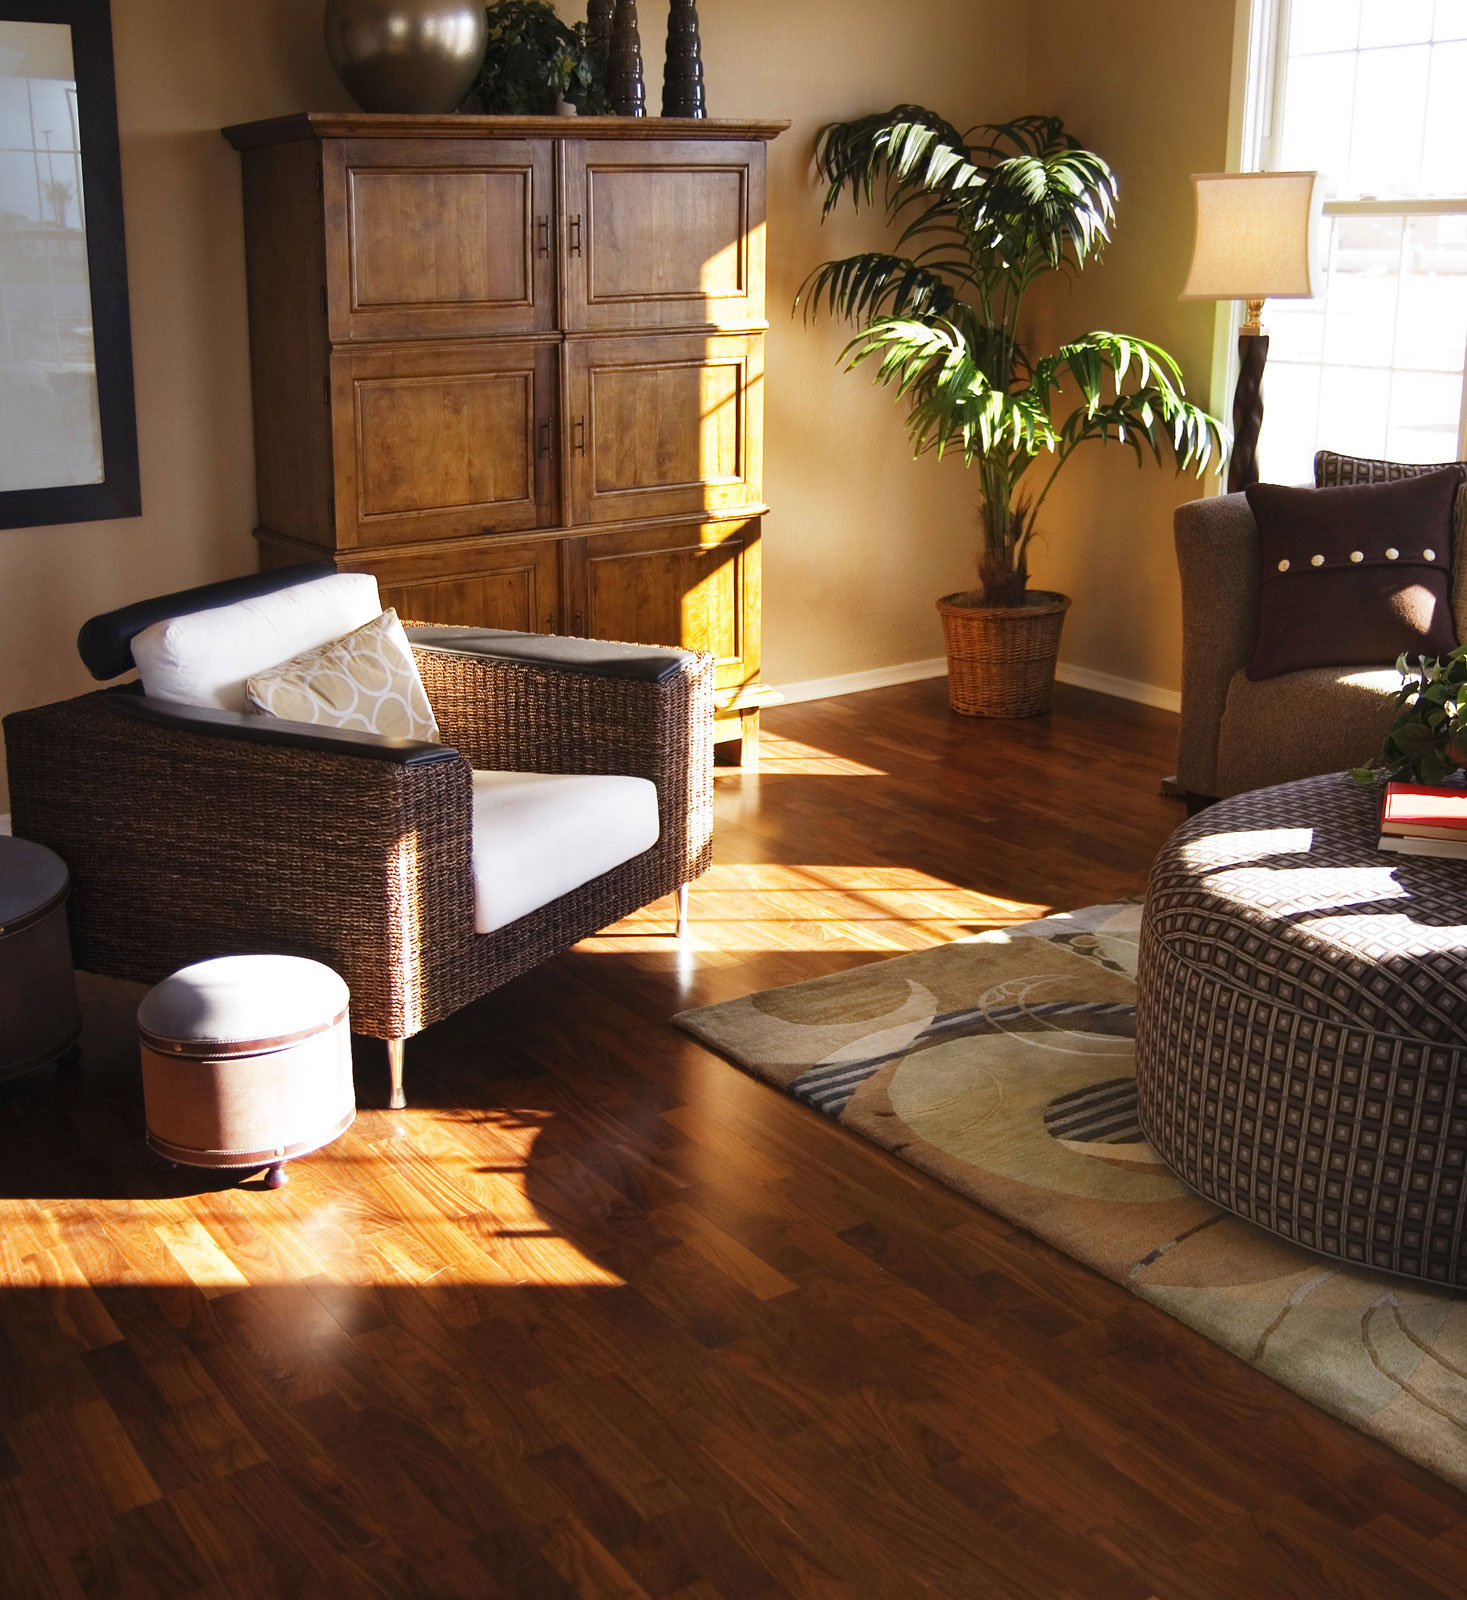 Aesthetics or functional: see all types of wood flooring